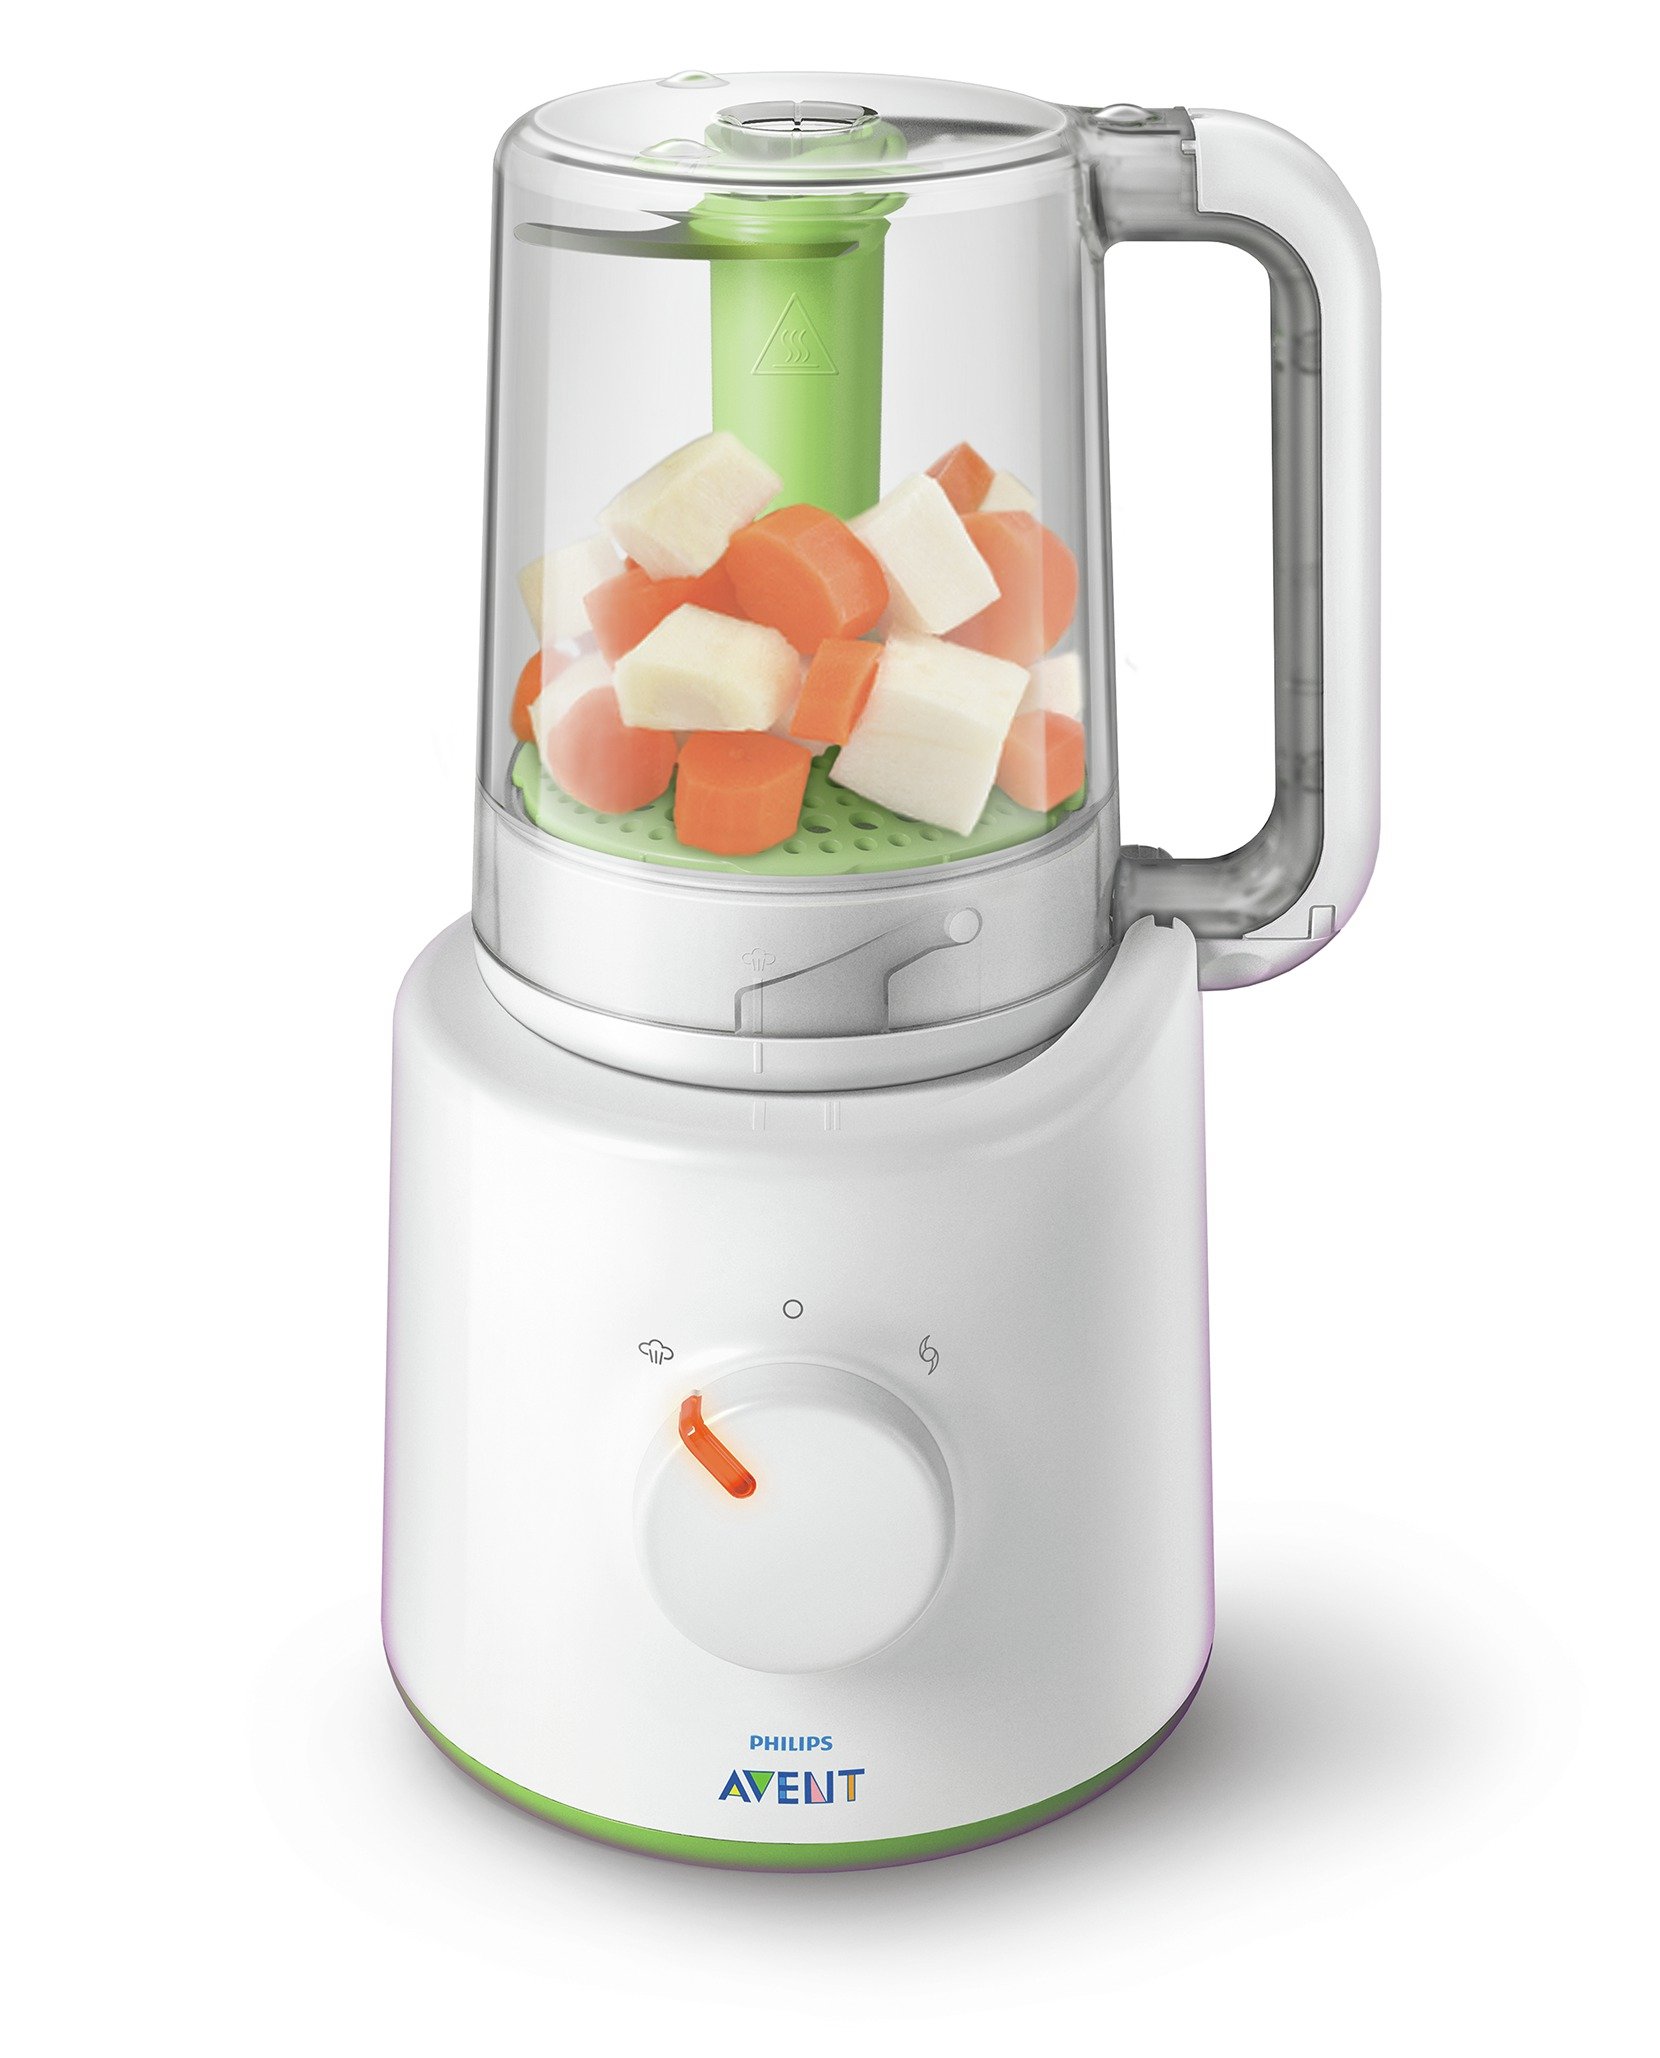 Philips Avent Combined Baby Food Steamer/Blender SCF870/21 Review